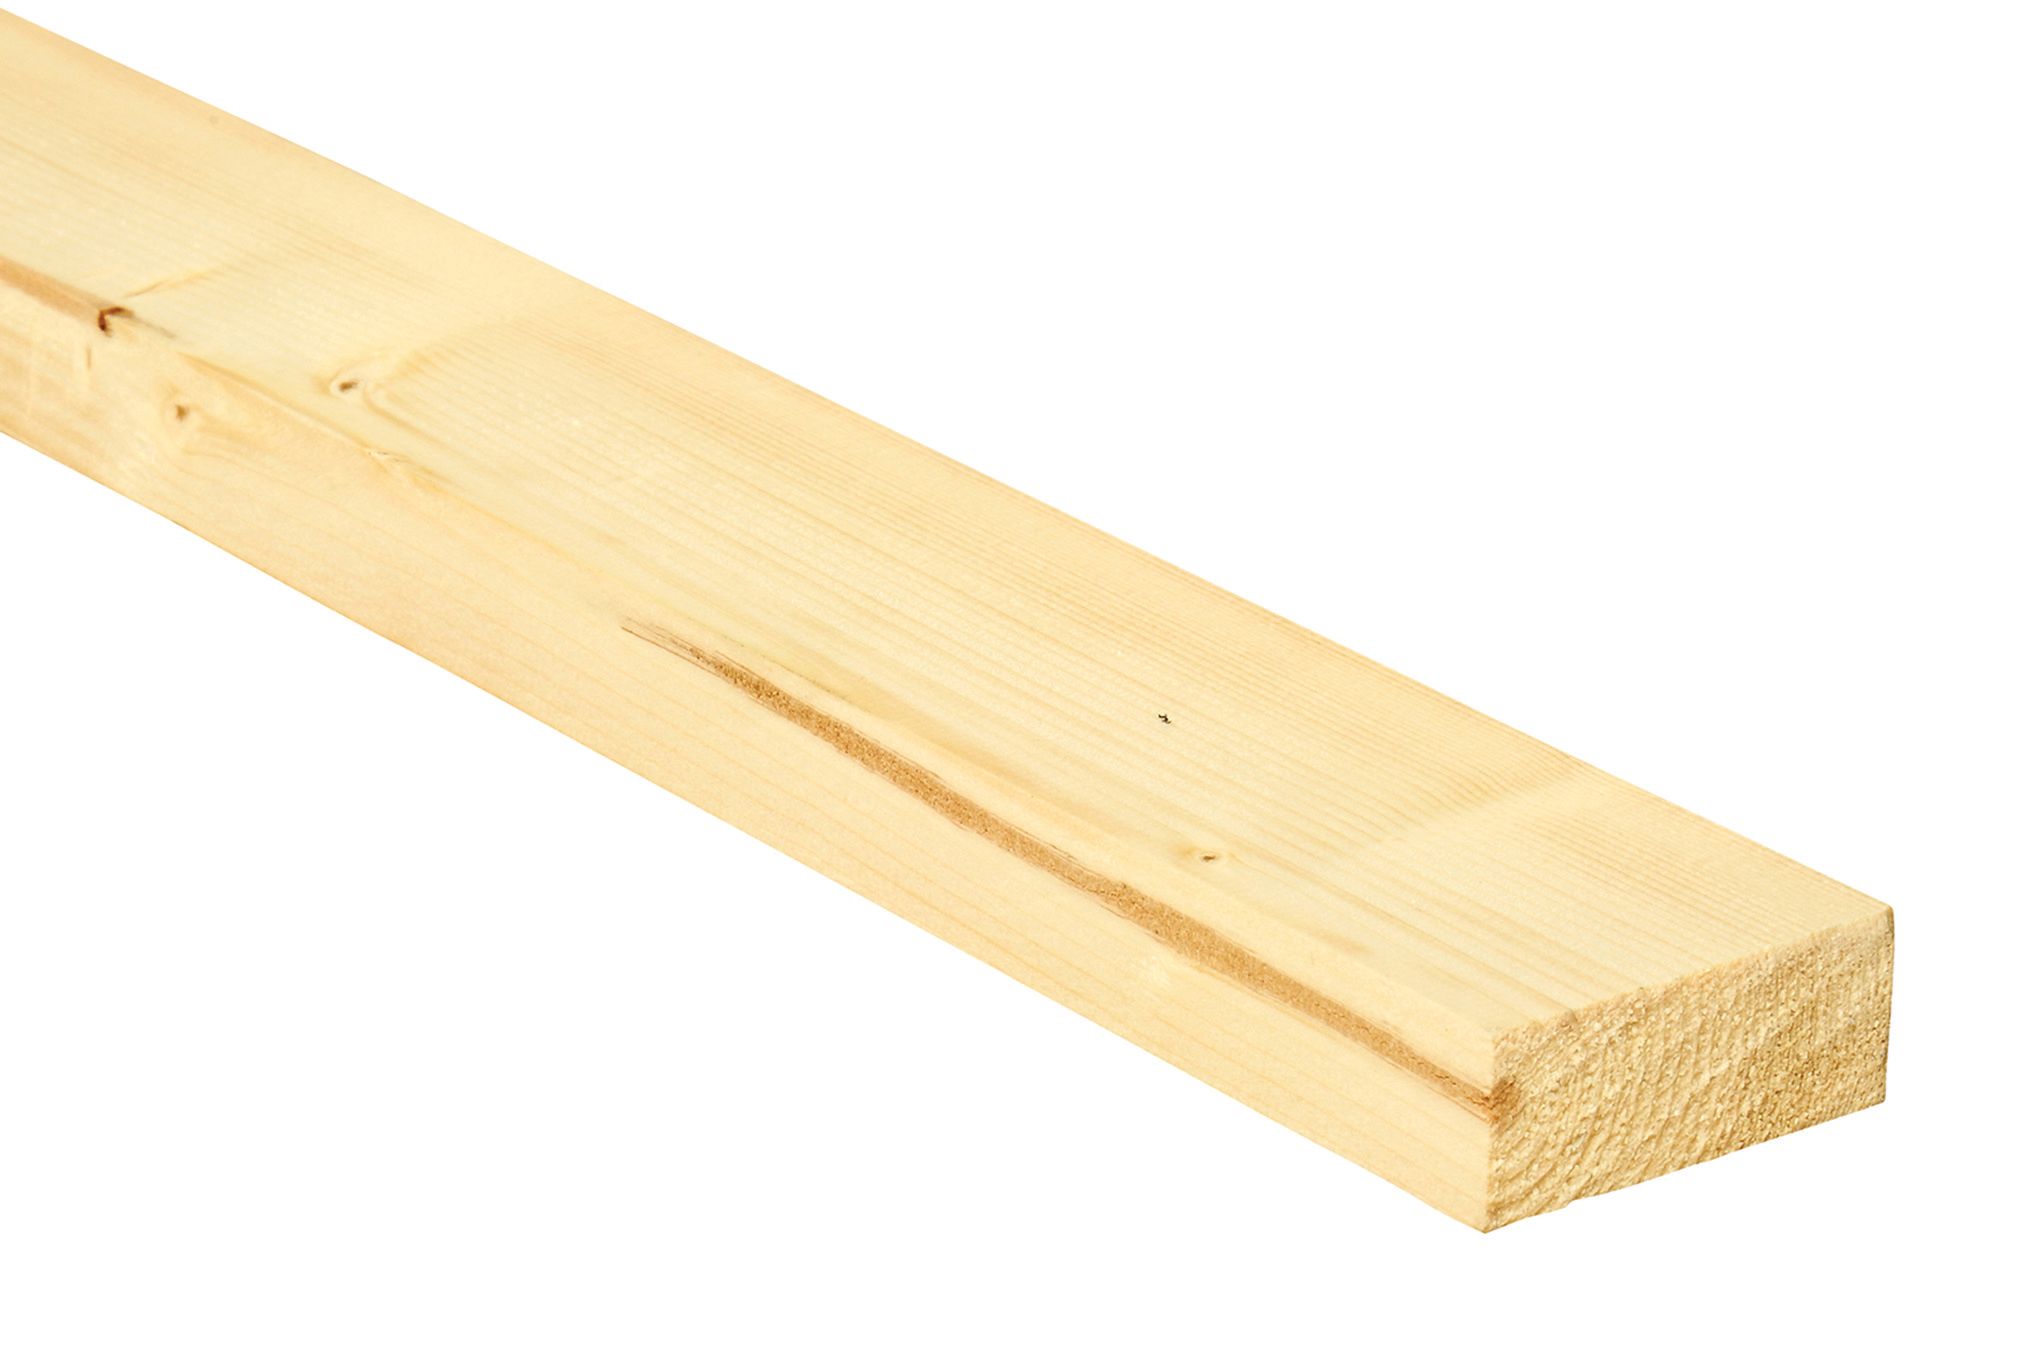 Wickes Whitewood PSE Timber - 18mm x 44mm x 1.8m